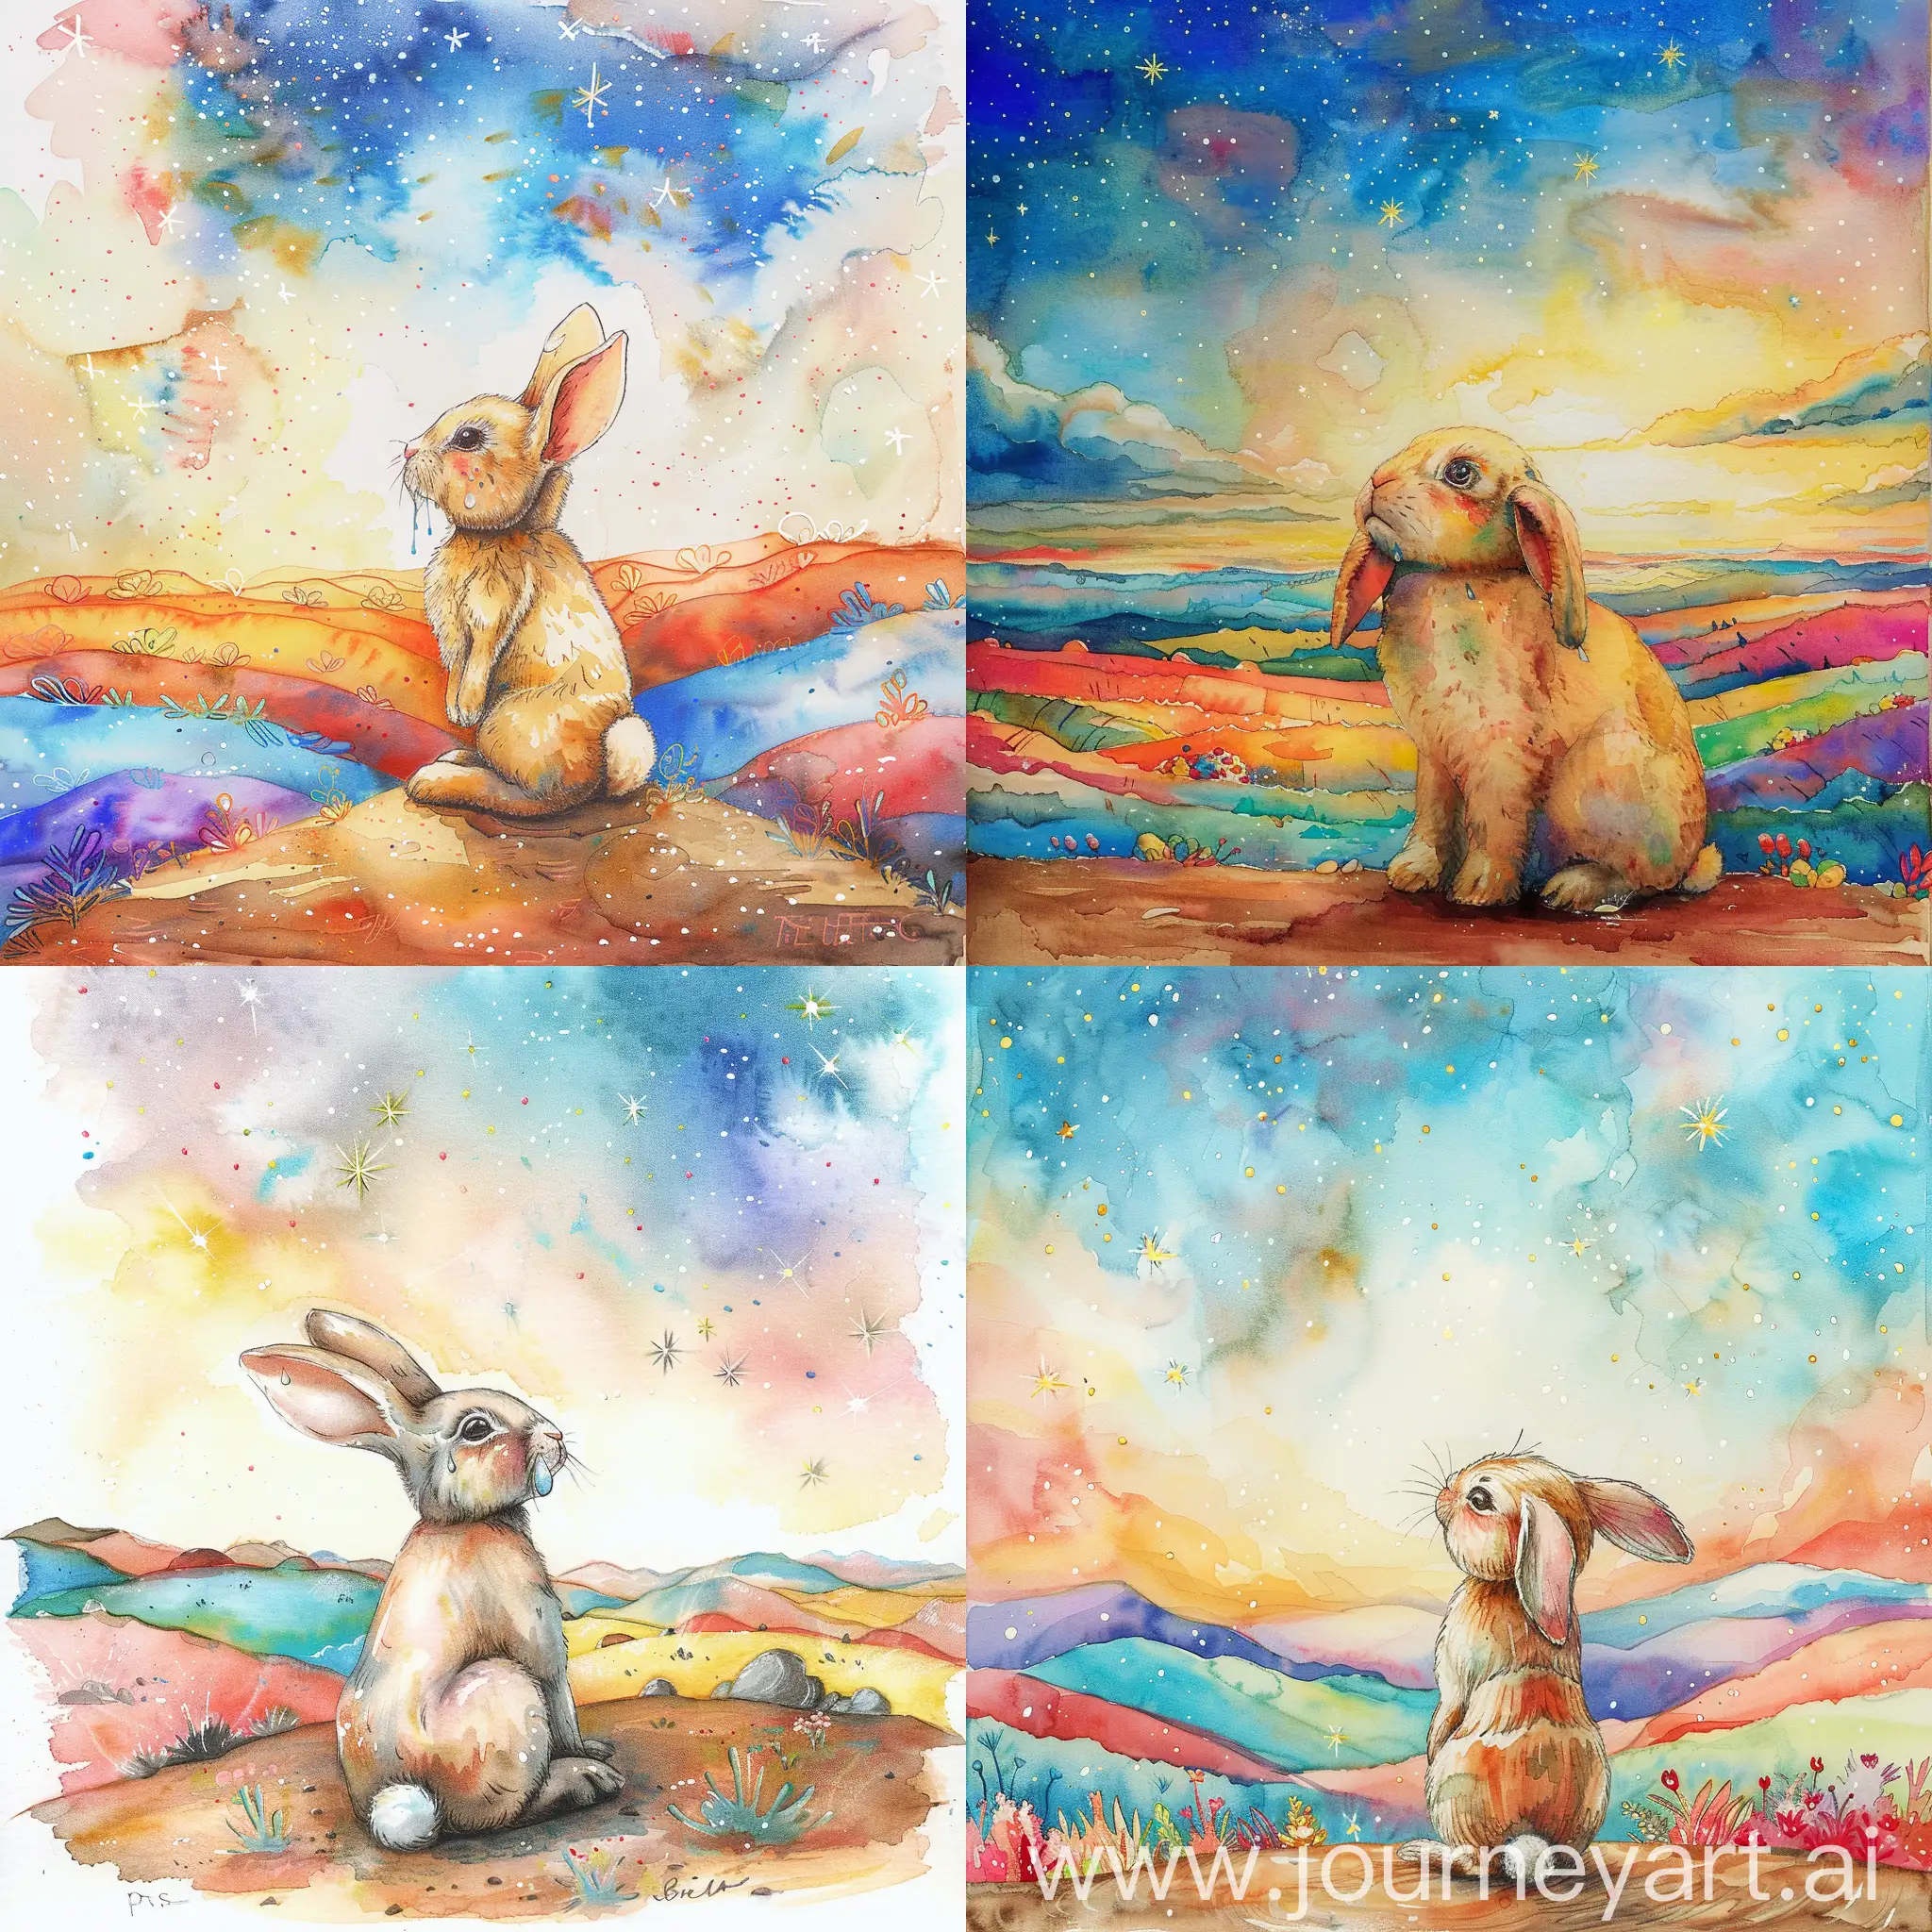 Solitary-Bunny-Gazing-at-Starry-Sky-in-Vibrant-Watercolor-Landscape